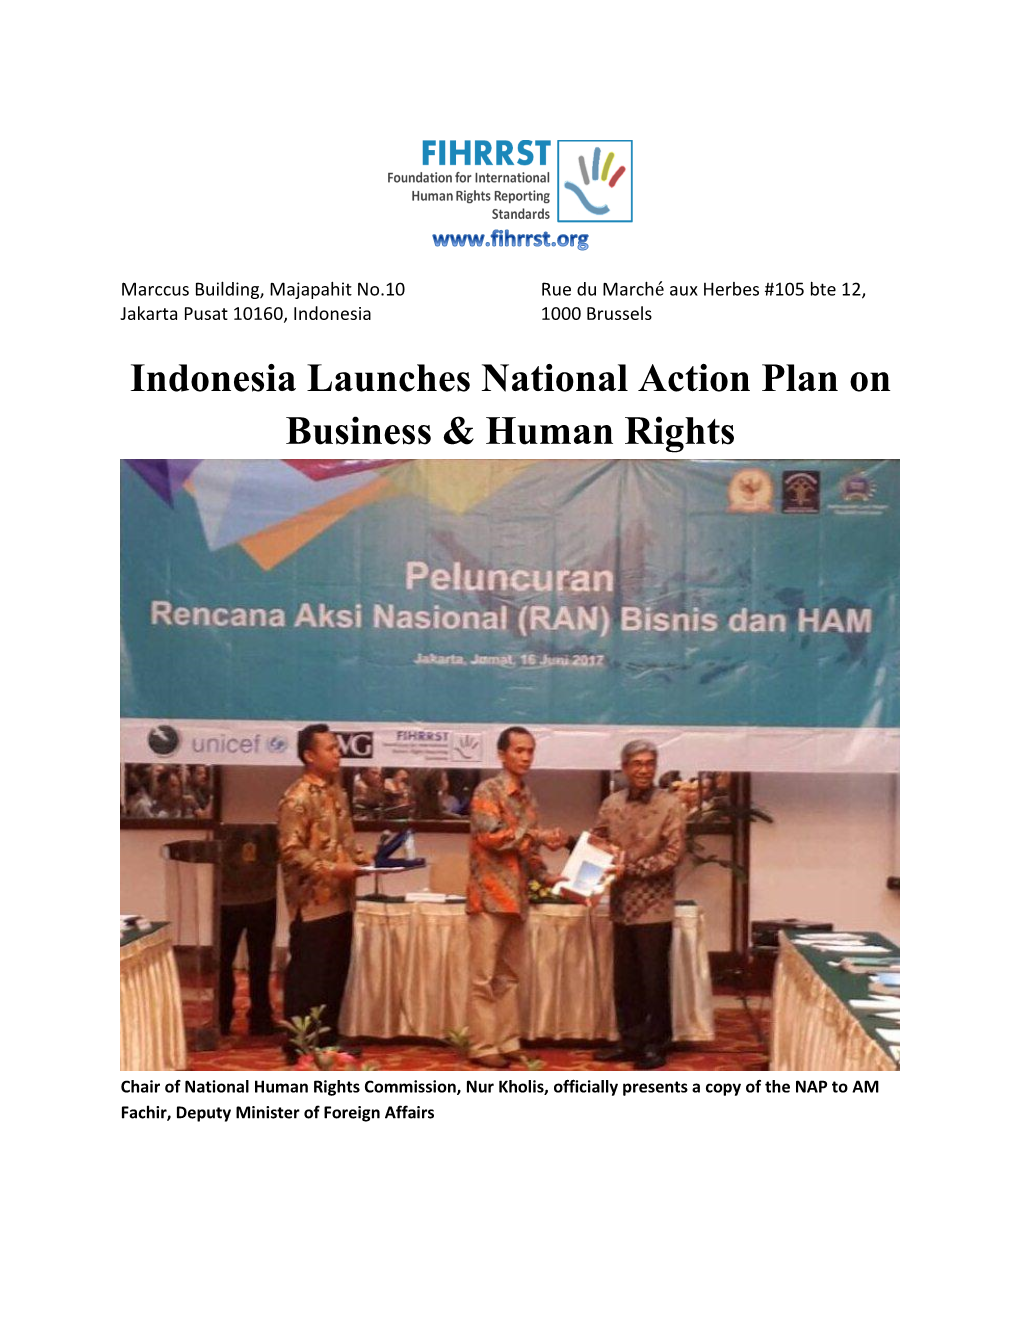 Indonesia Launches National Action Plan on Business & Human Rights